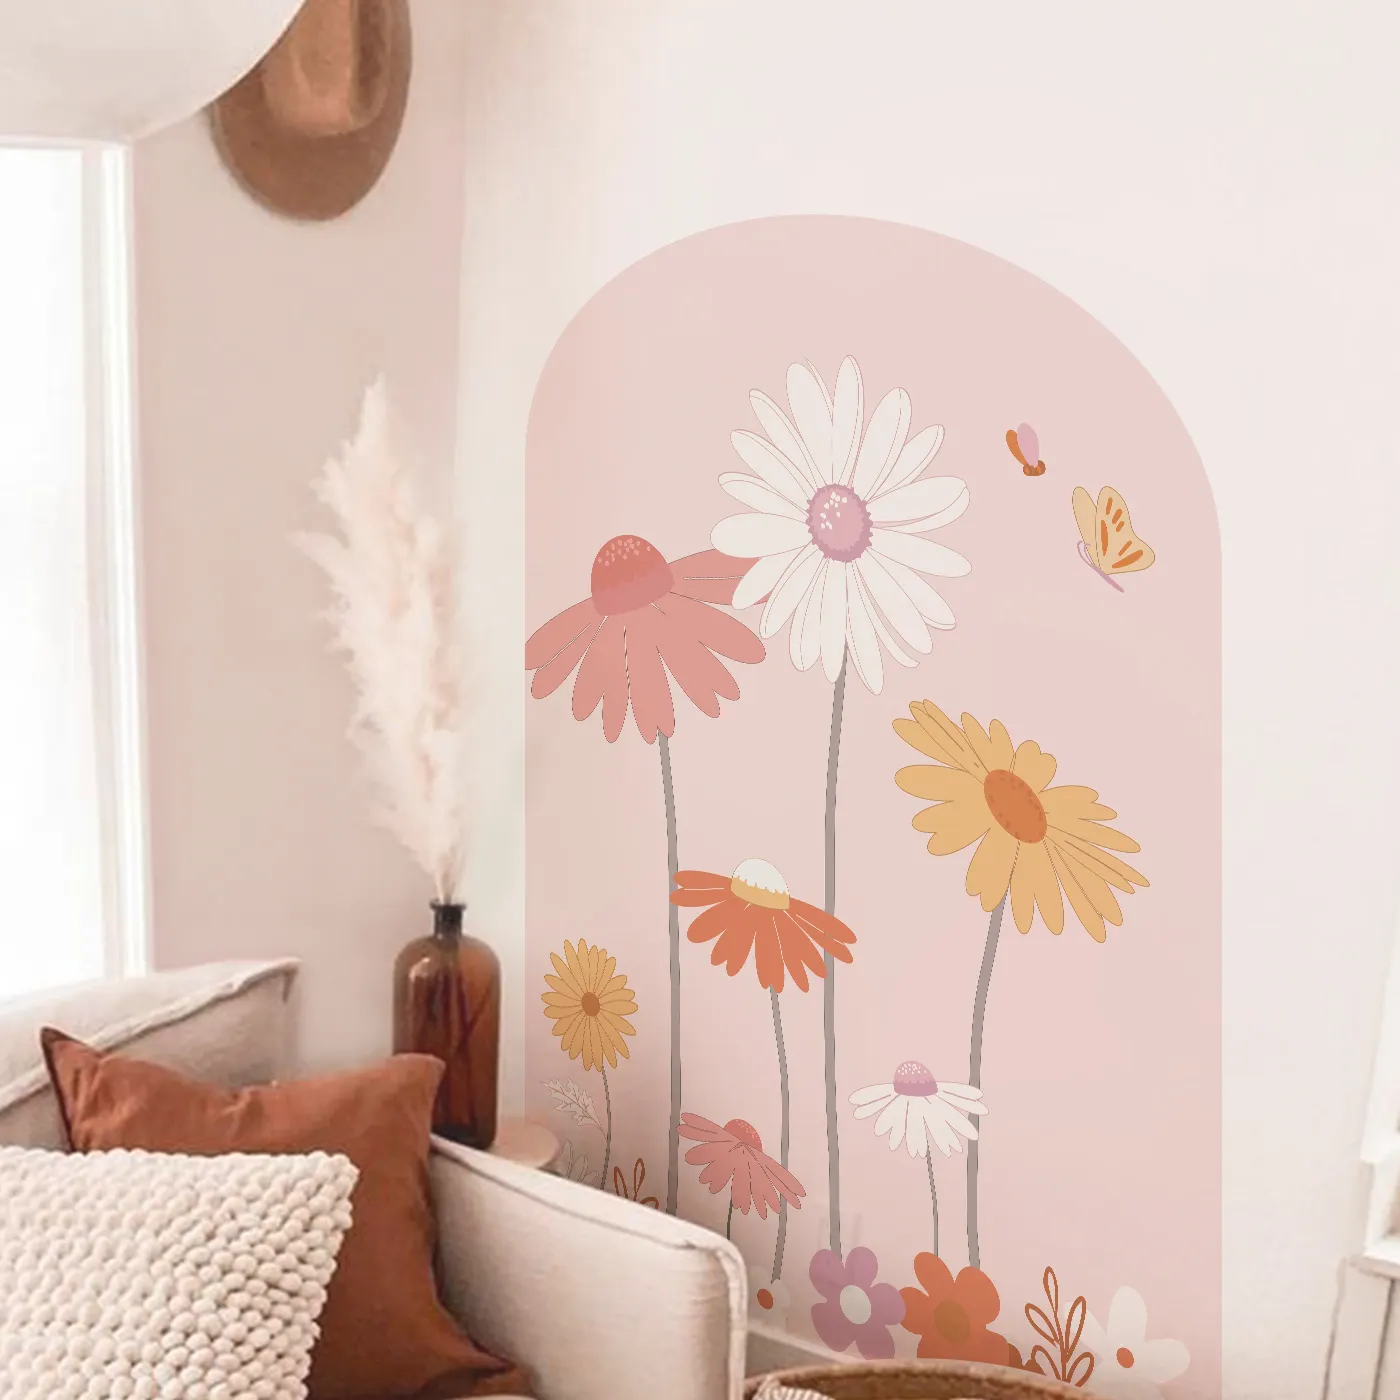 Funlife Arch Flower Wall Decals Wild Daisy Floral Girls' Wall Decor Removable Wall Sticker Kids Bedroom Decoration